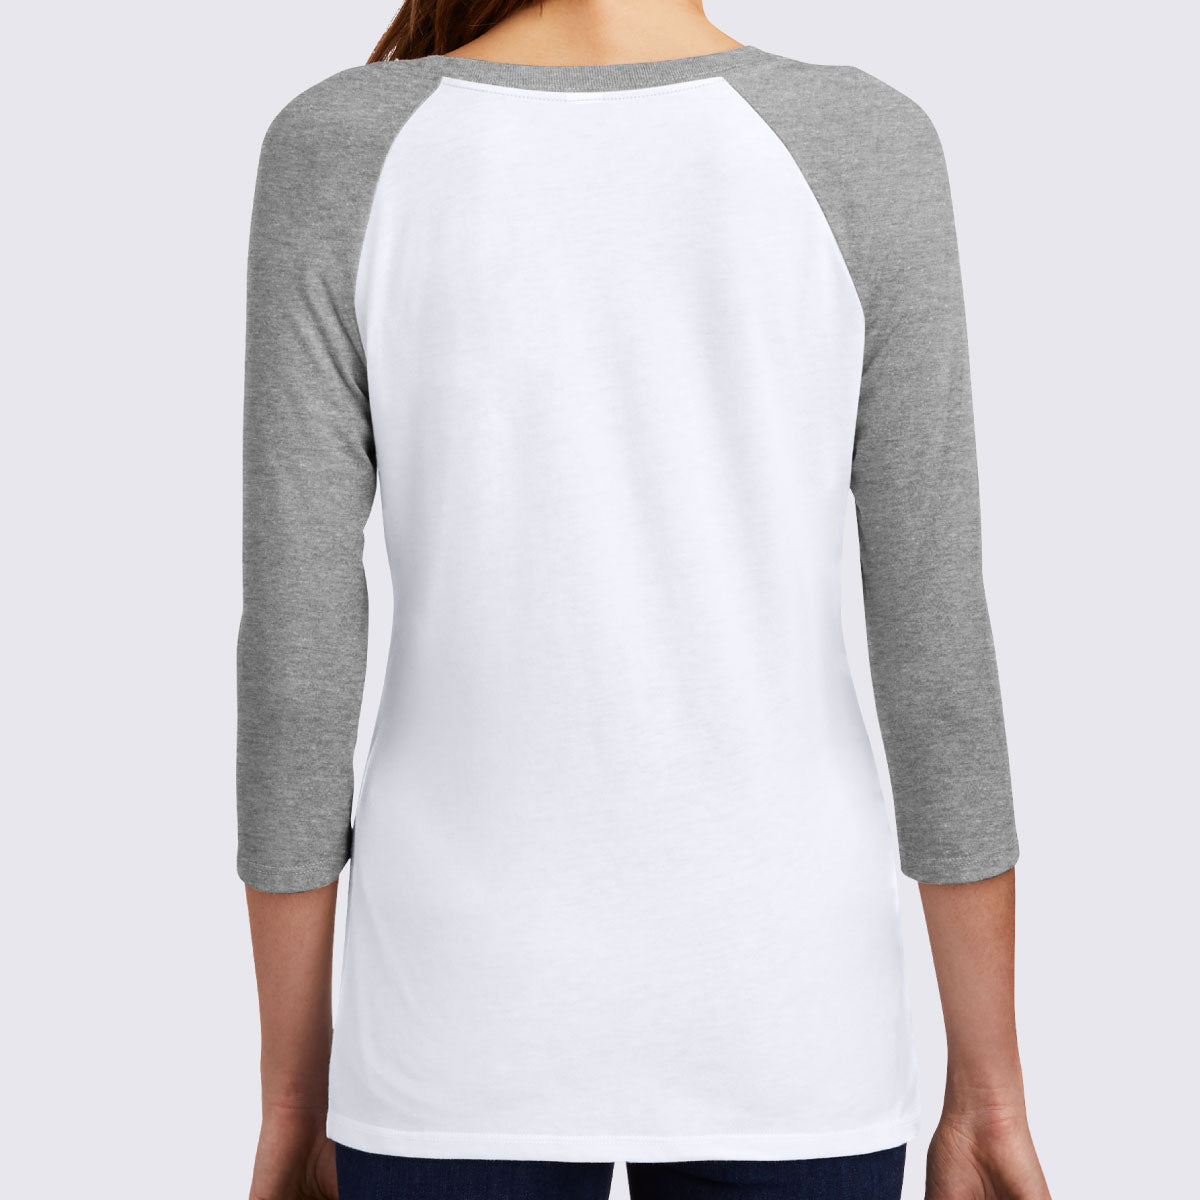 Therapy Doodle Women&#39;s Perfect Tri® 3/4 Sleeve Raglan